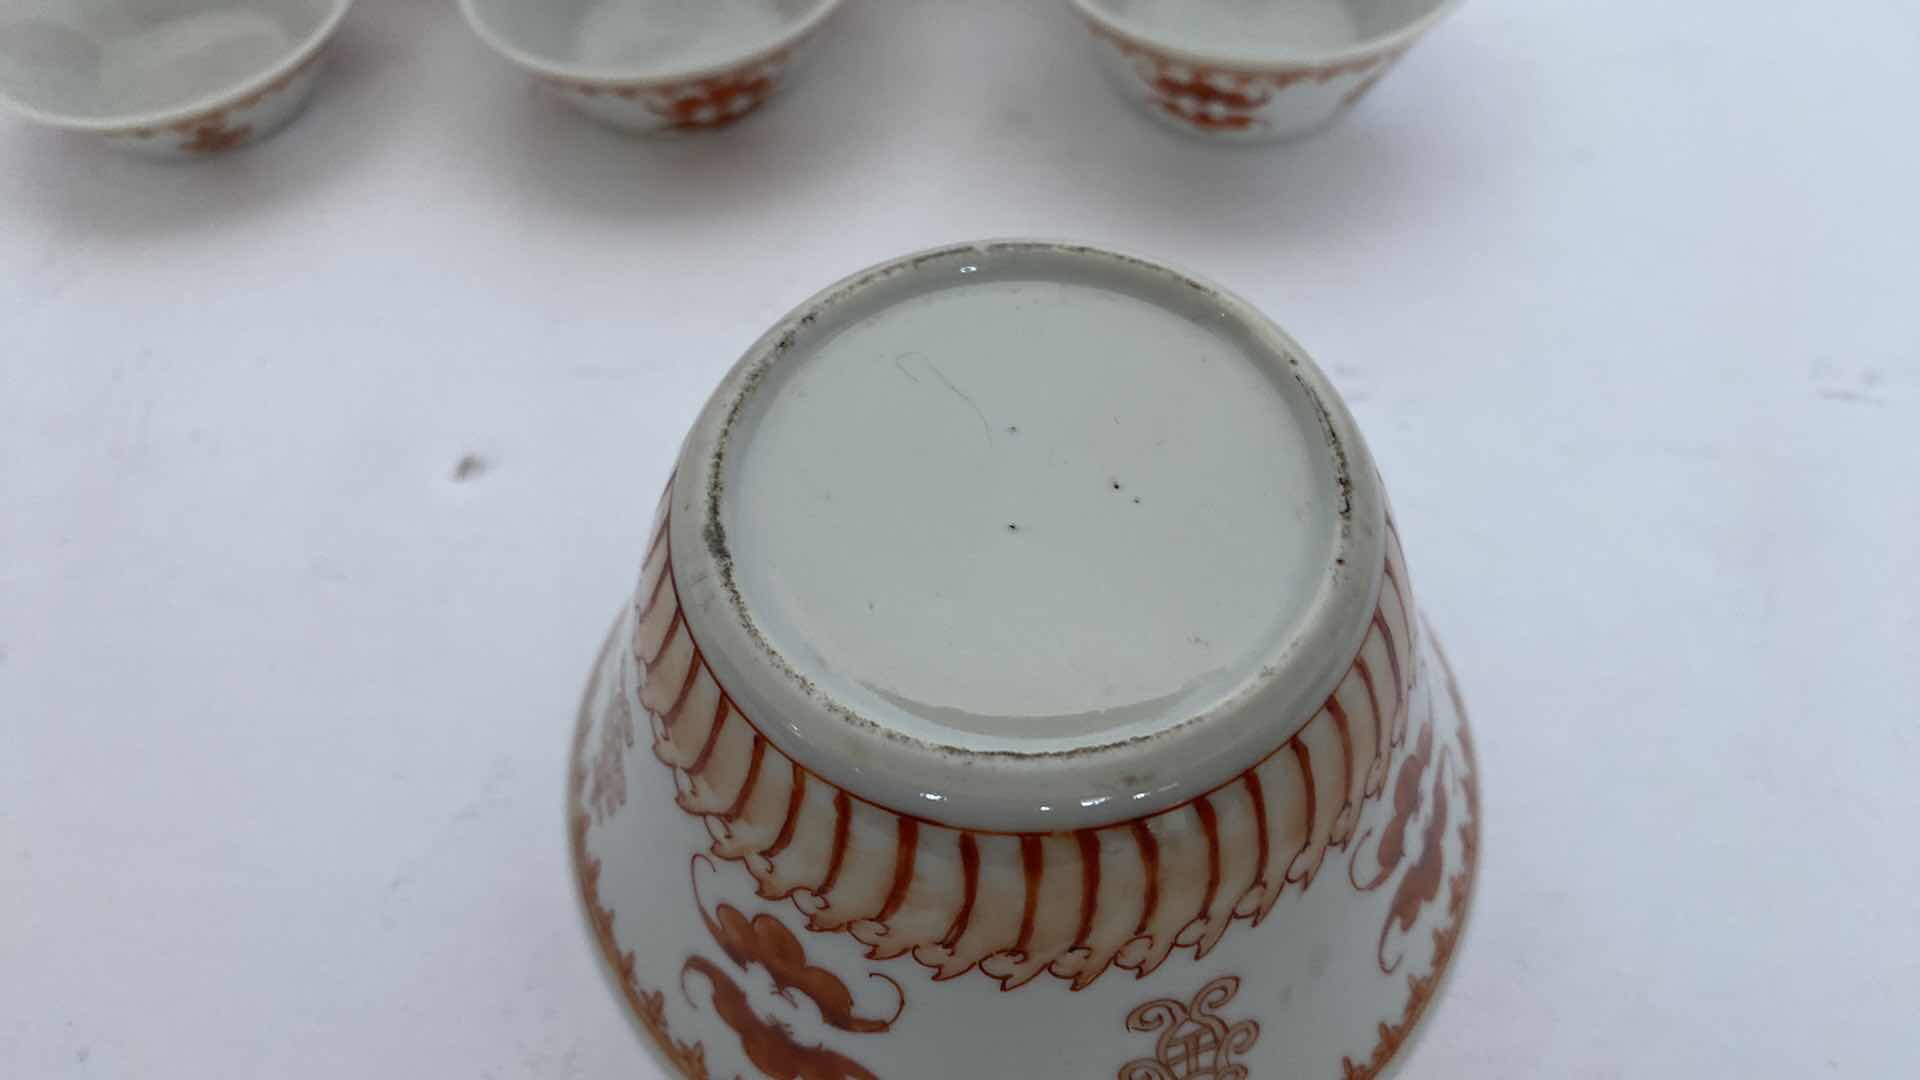 Photo 3 of CHINESE SMALL NESTING BOWLS AND VASE 4.25”